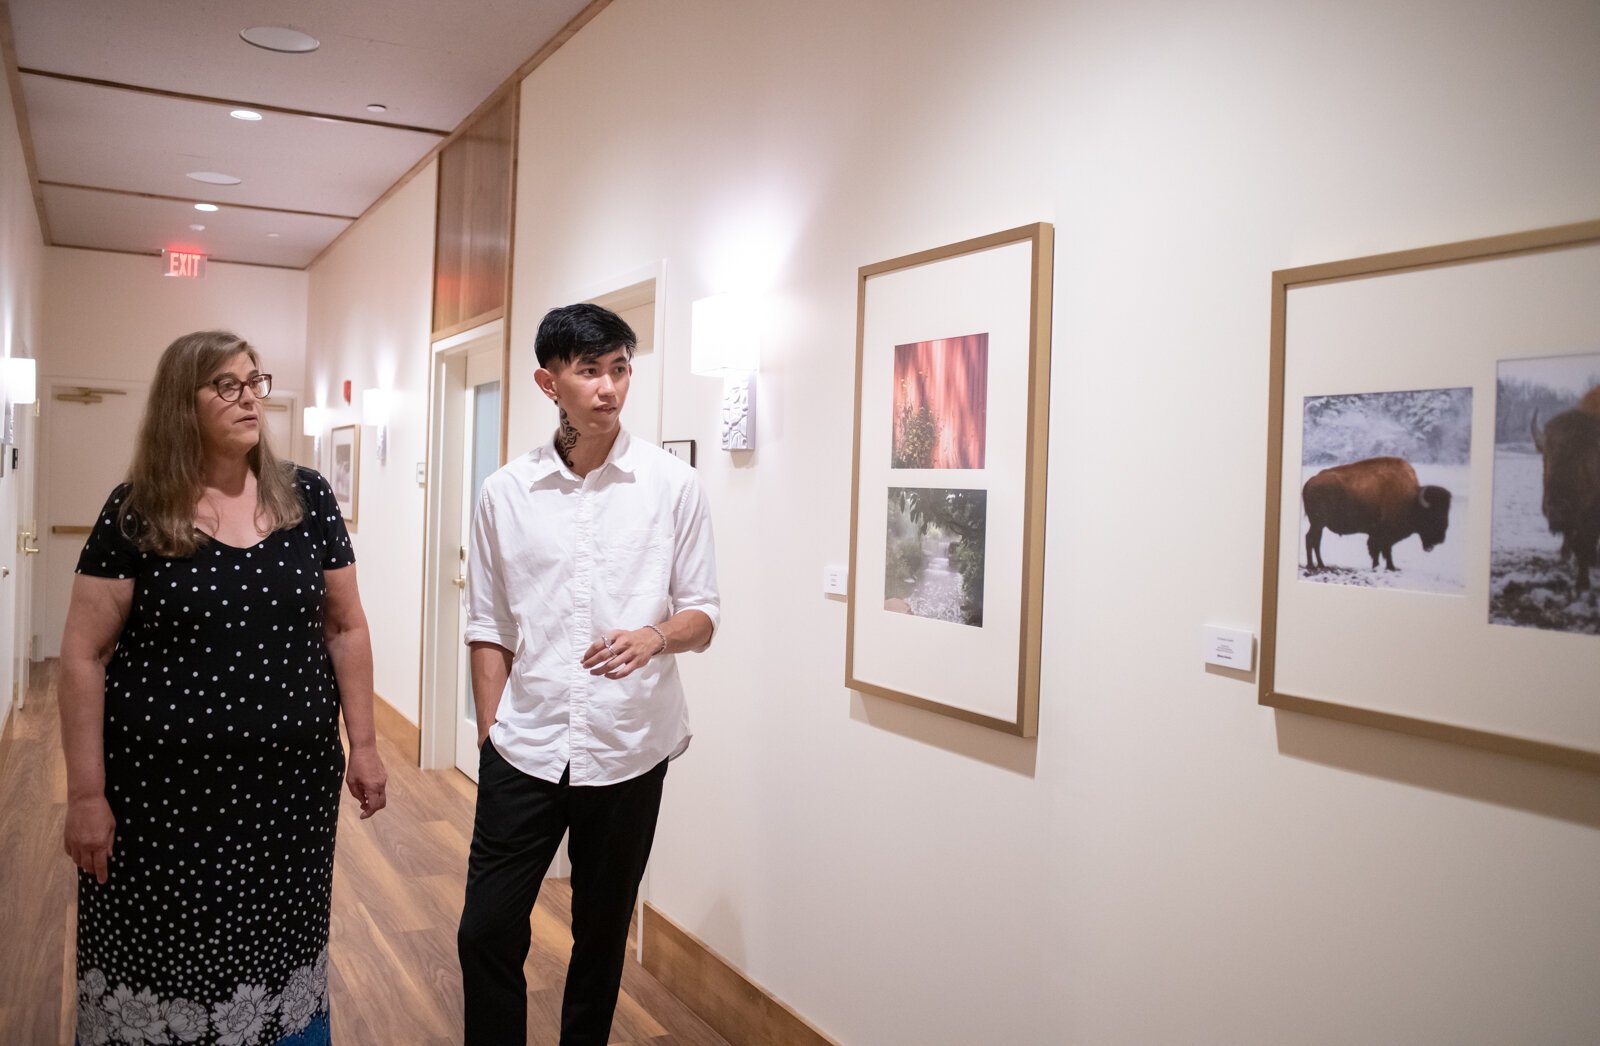 PFW Professor Rebecca Coffman and recent PFW graduate and artist Johnny Min walk through the new revolving gallery featuring work from Purdue Fort Wayne students, alumni and faculty at The Bradley, 204 W. Main St. 